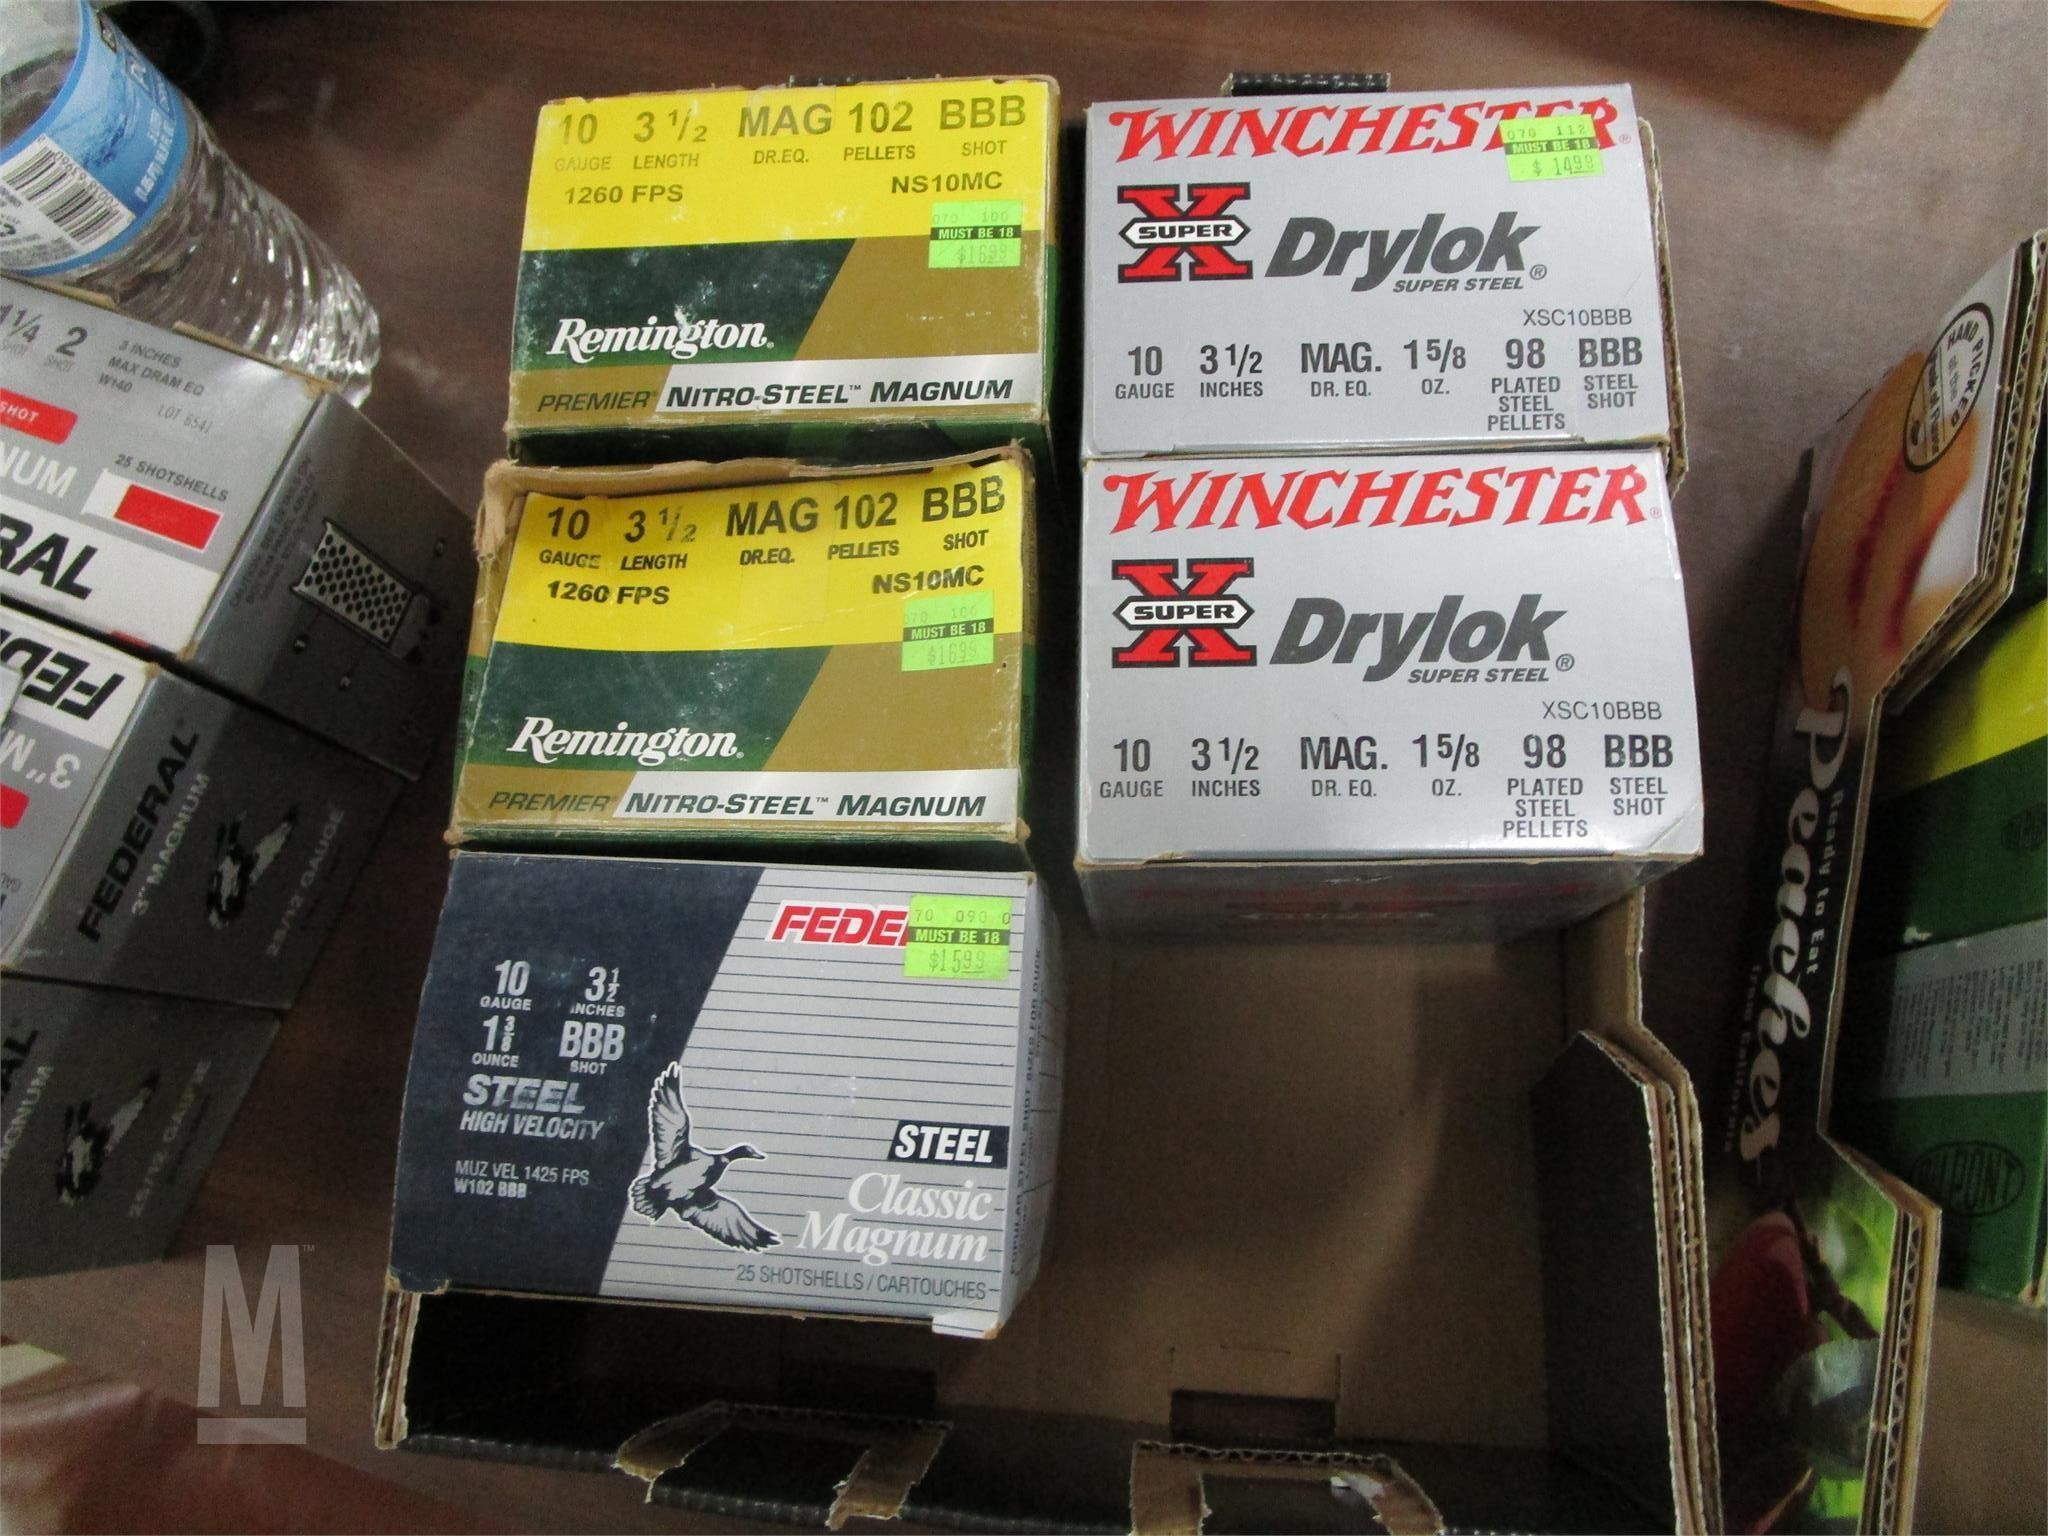 Details about   Authentic/Original "New Old Stock" 1977 Winchester Calendar 